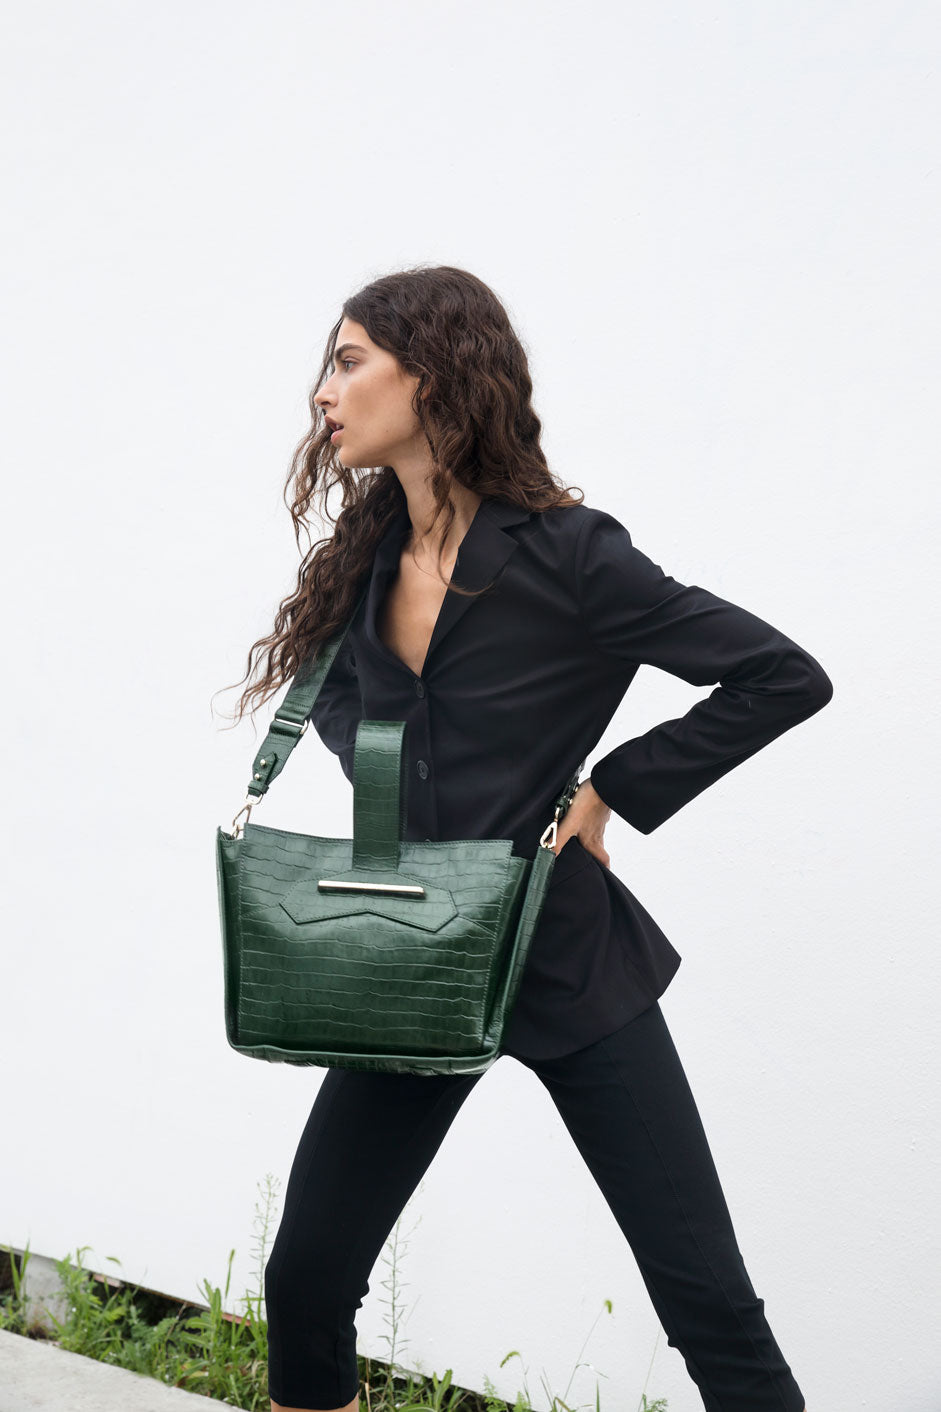 Manon Crossbody Forrest Green Croc by Naissant NYC